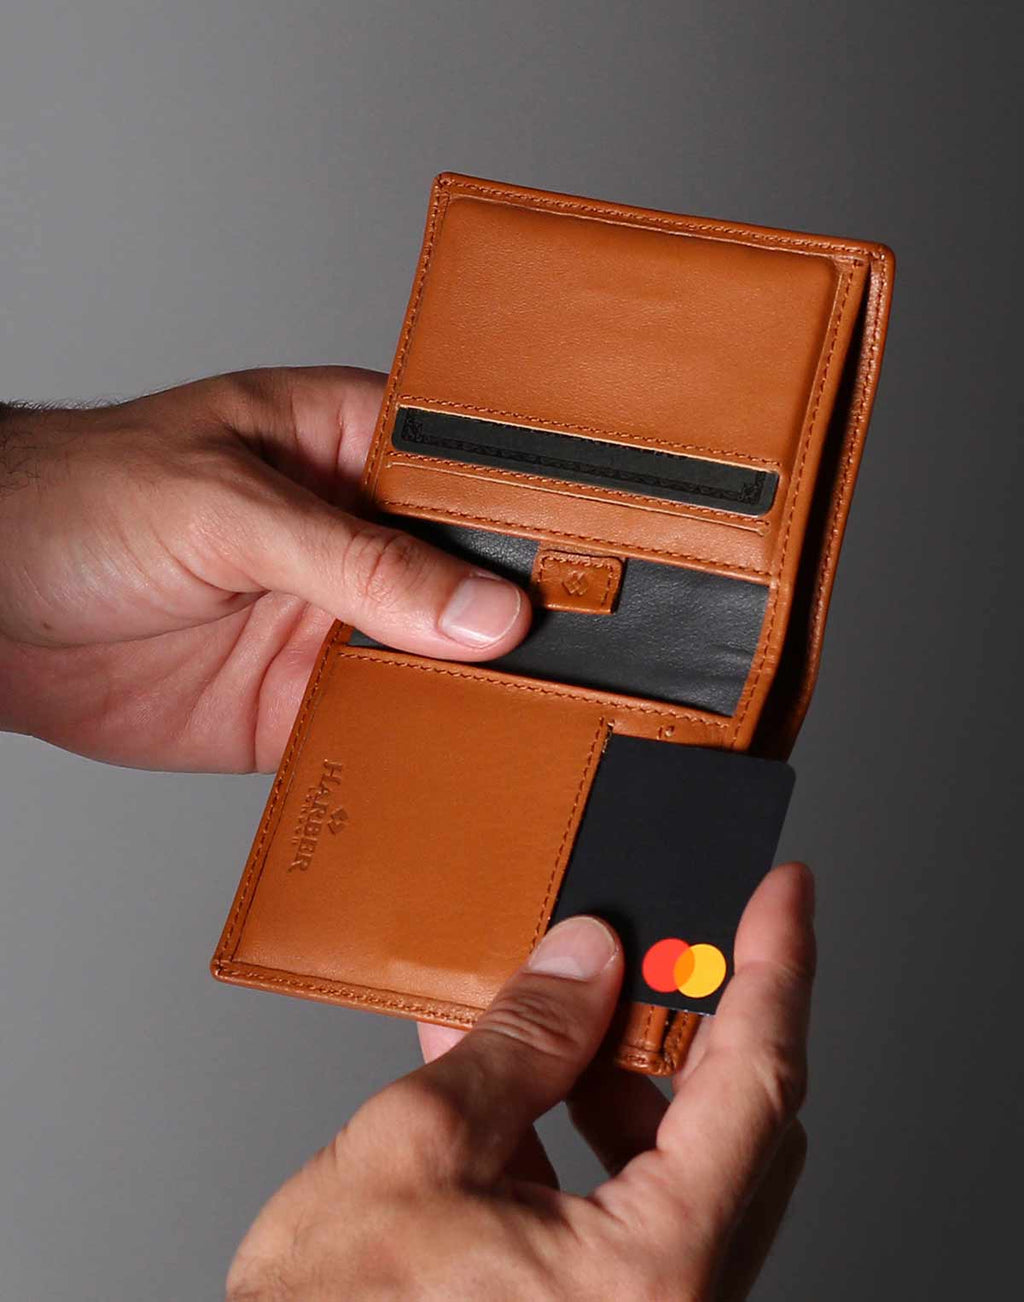 Card Holder - Luxury All Wallets and Small Leather Goods - Wallets